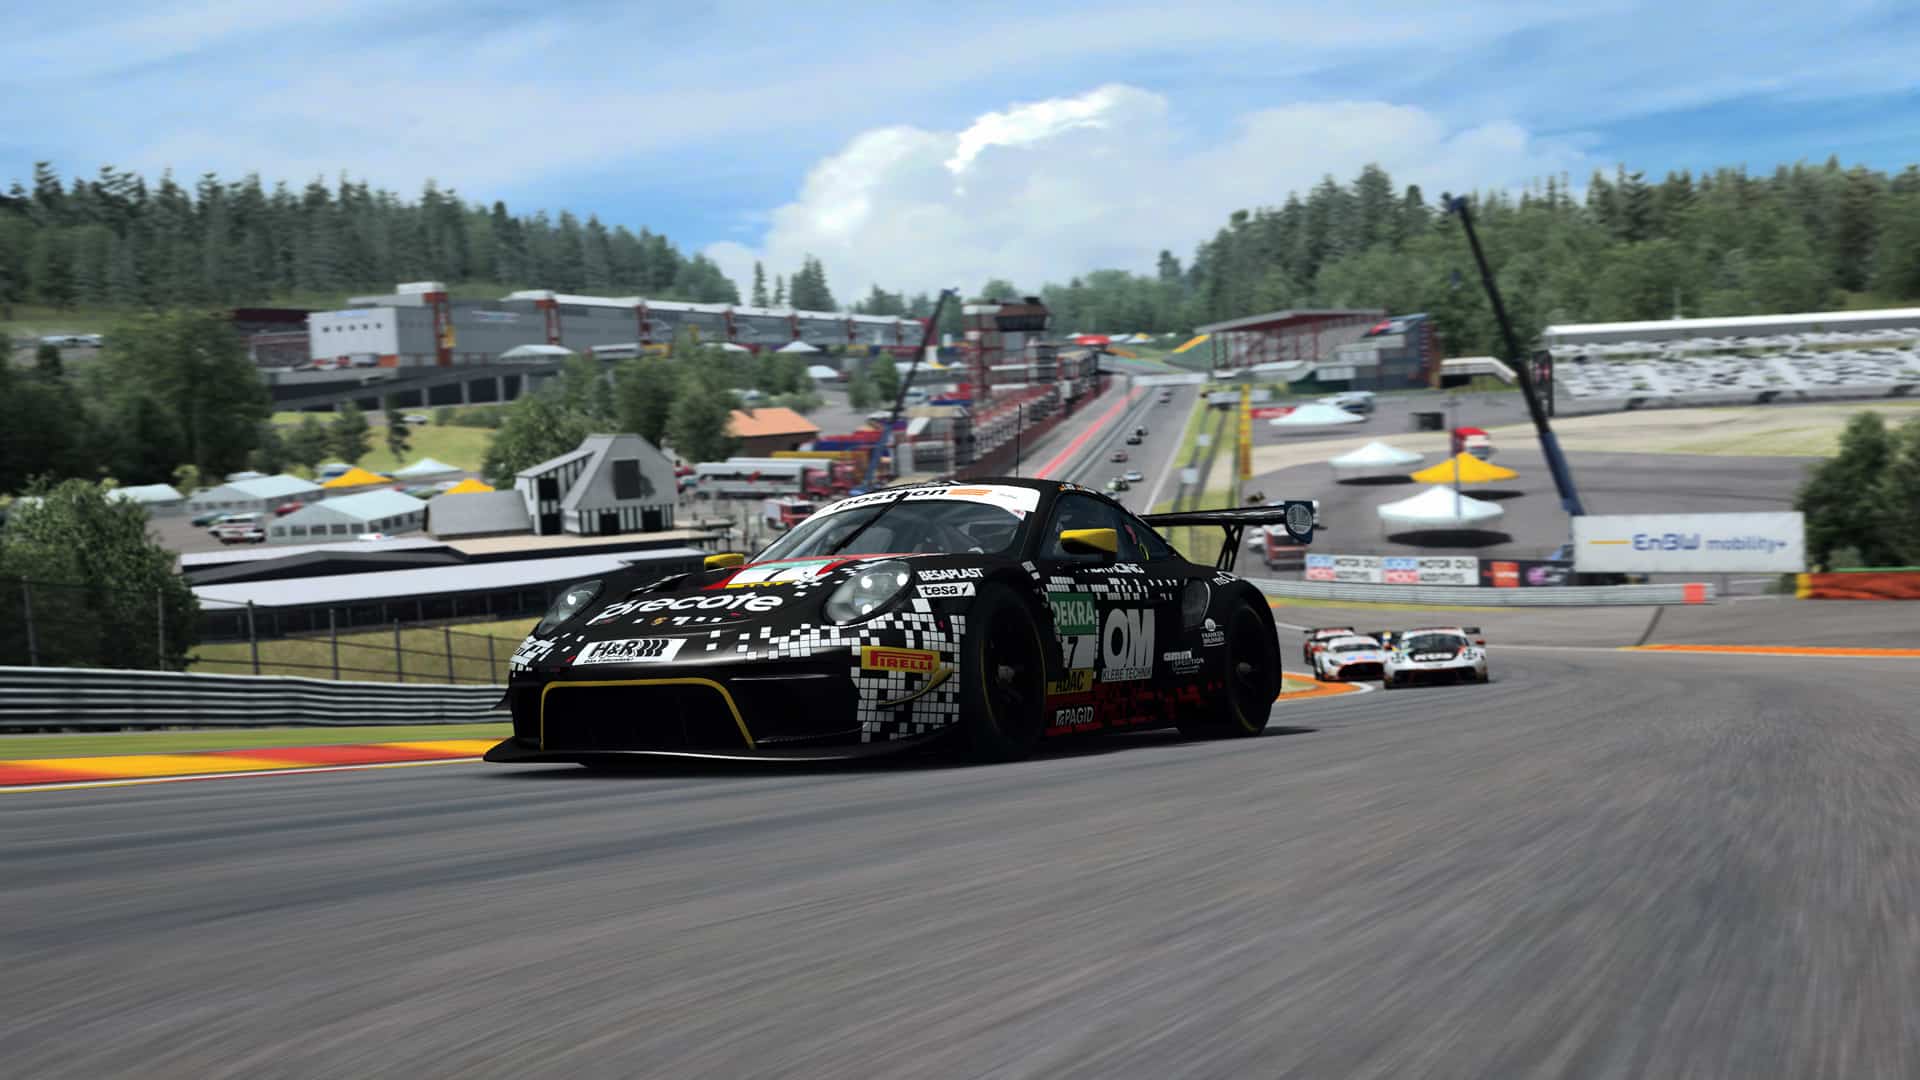 ADAC GT MASTERS Esports Championship returns for 2022, live on Traxion.GG